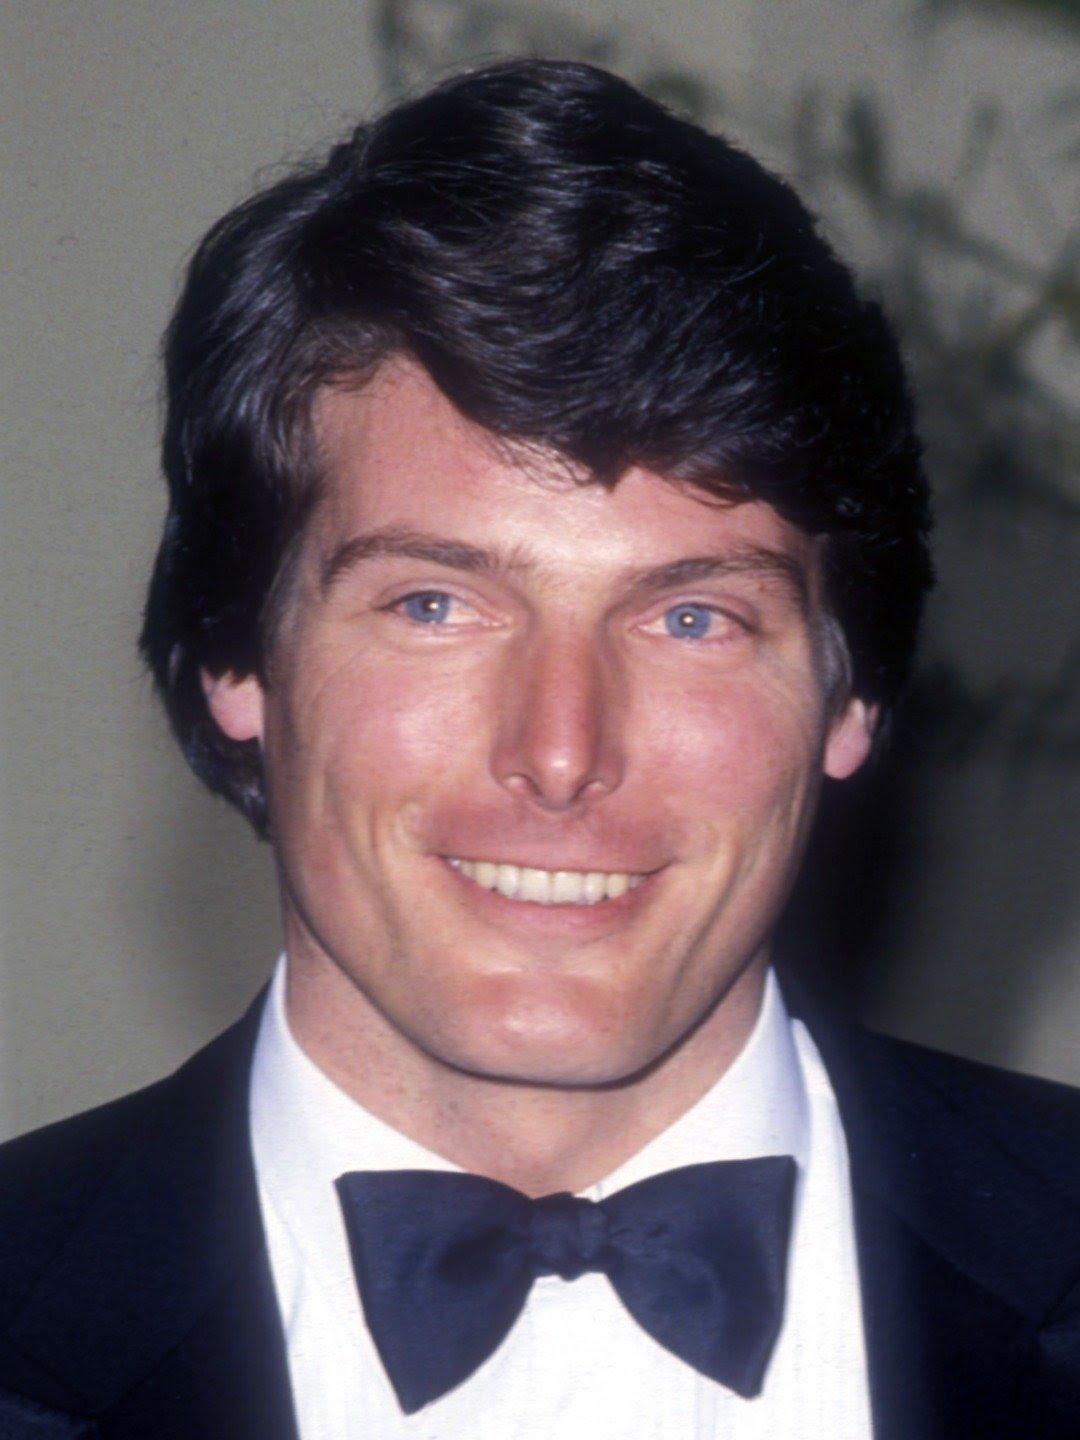 Happy birthday Christopher Reeve today is your 69th birthday and your great as Superman in Superman I - IV R.I.P. 